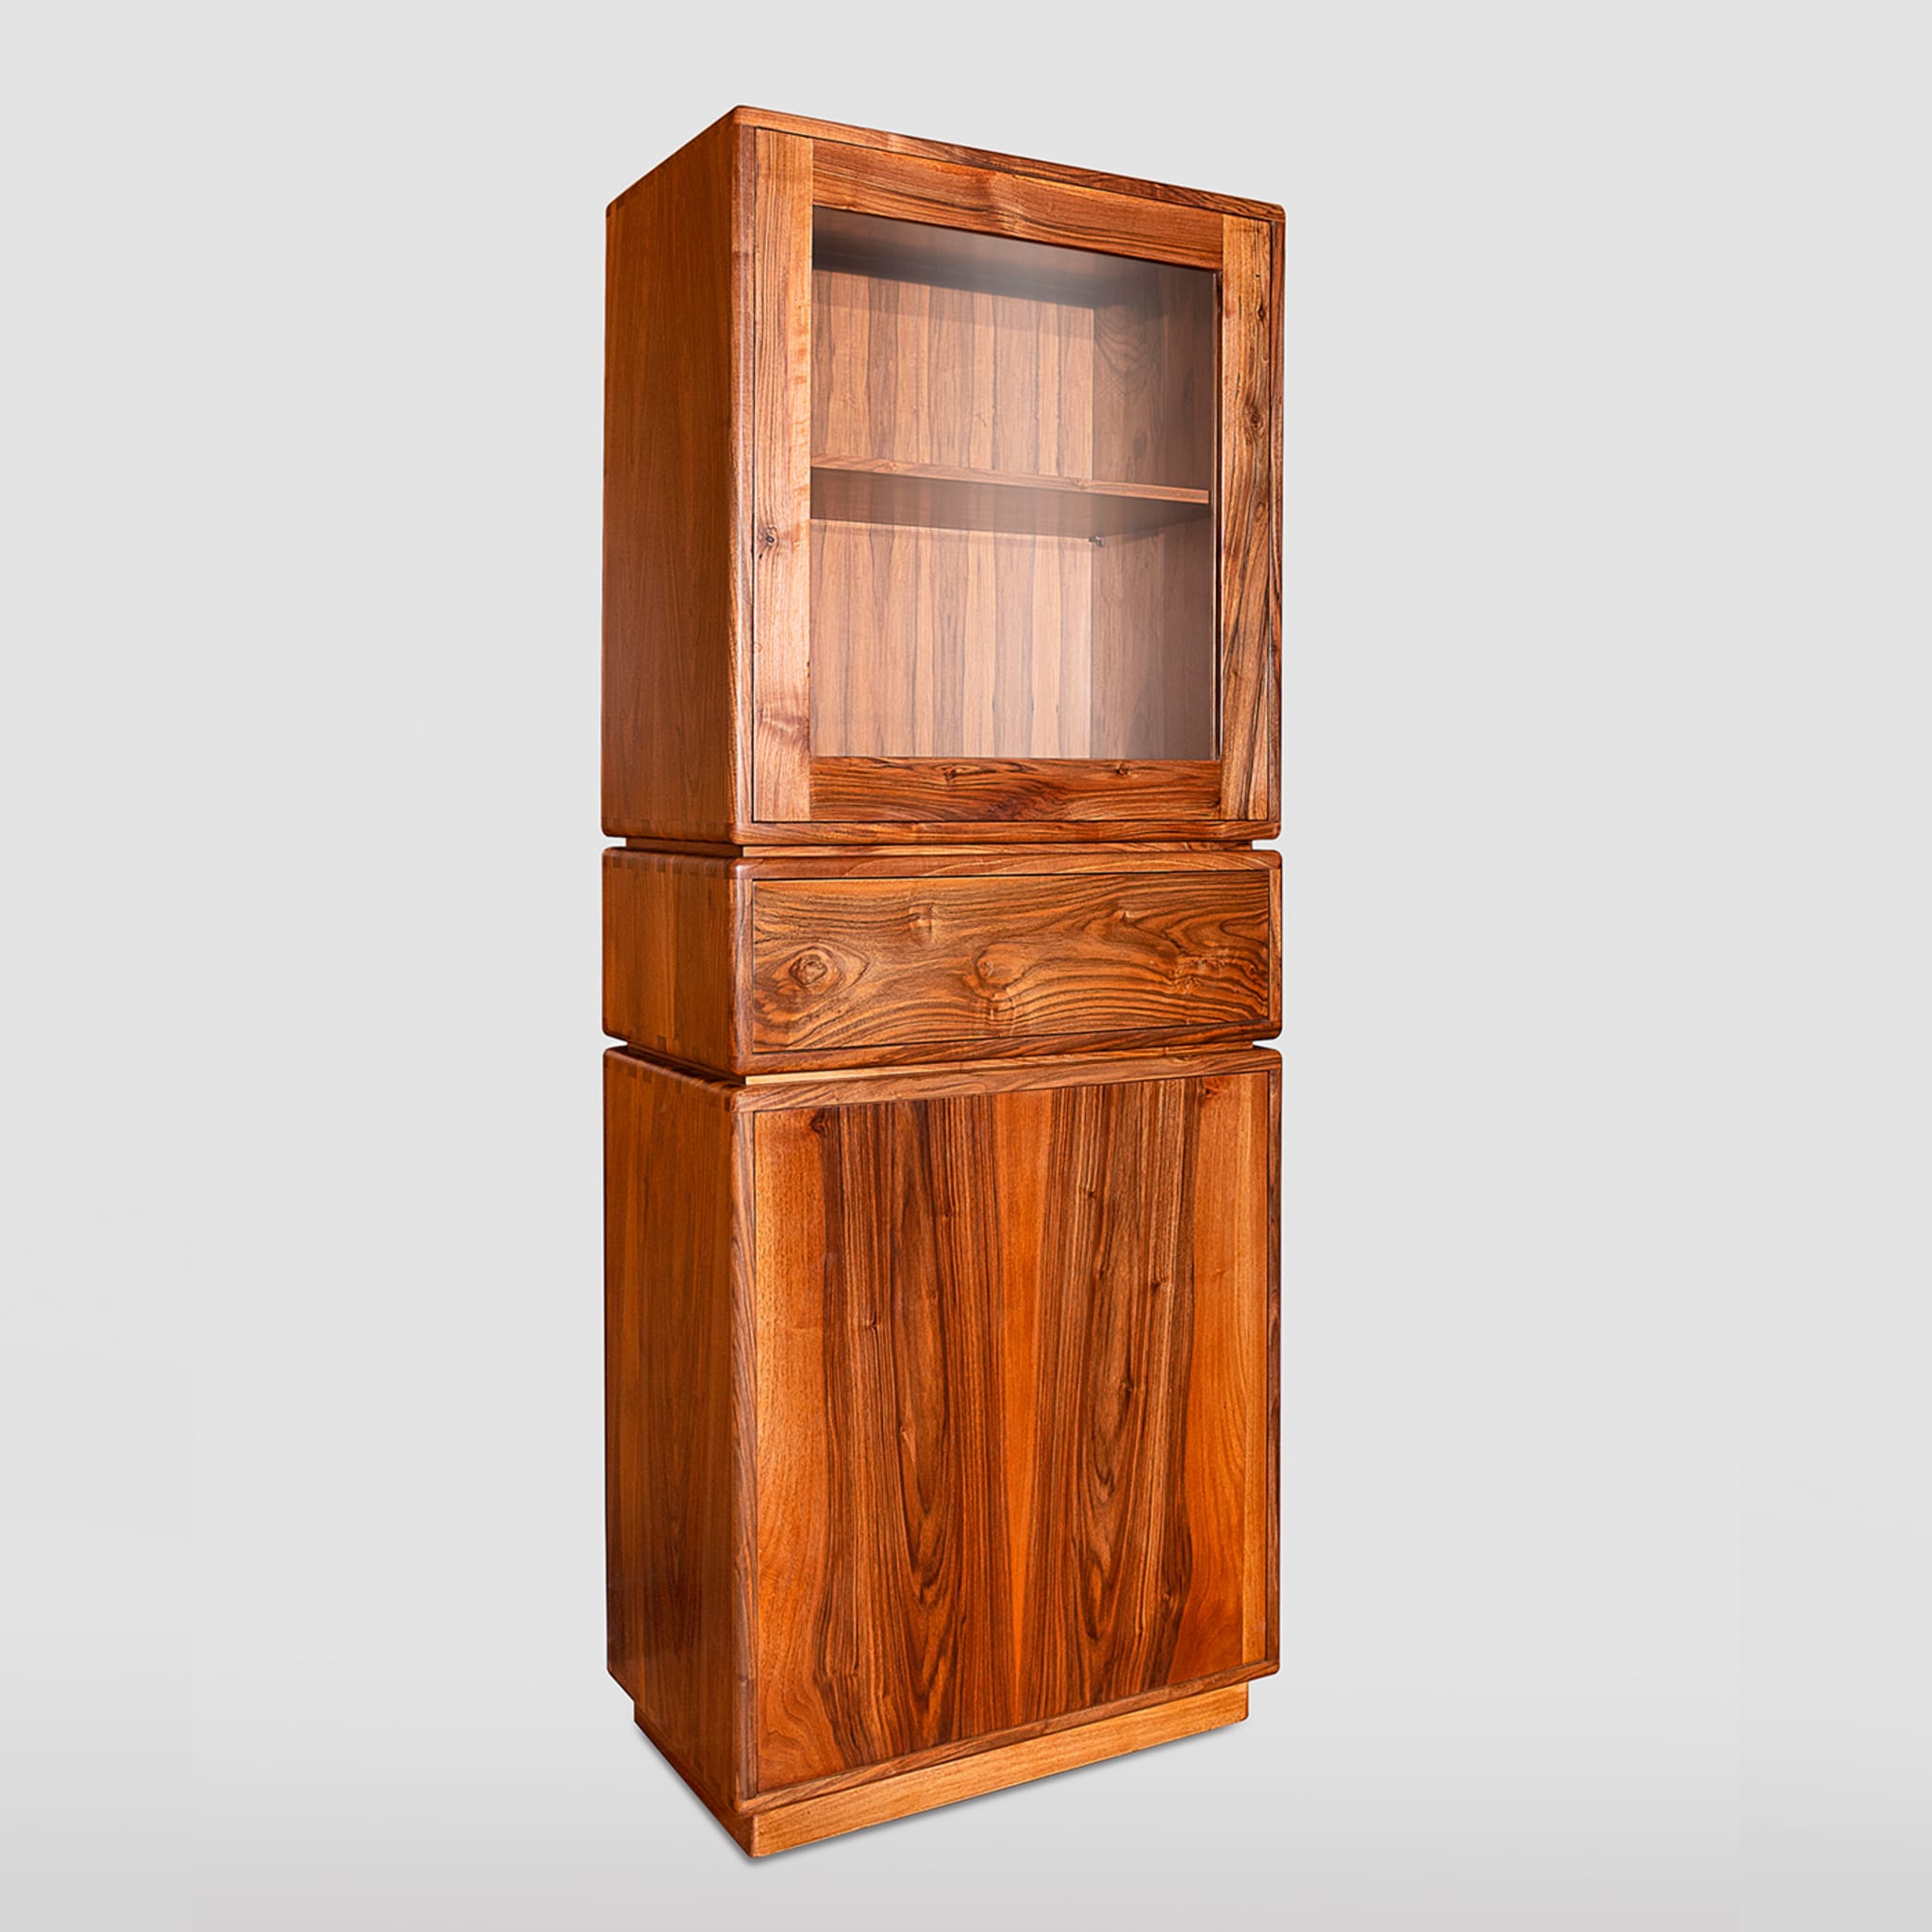 Dovetail Cabinet by Eugenio Gambella - Alternative view 2